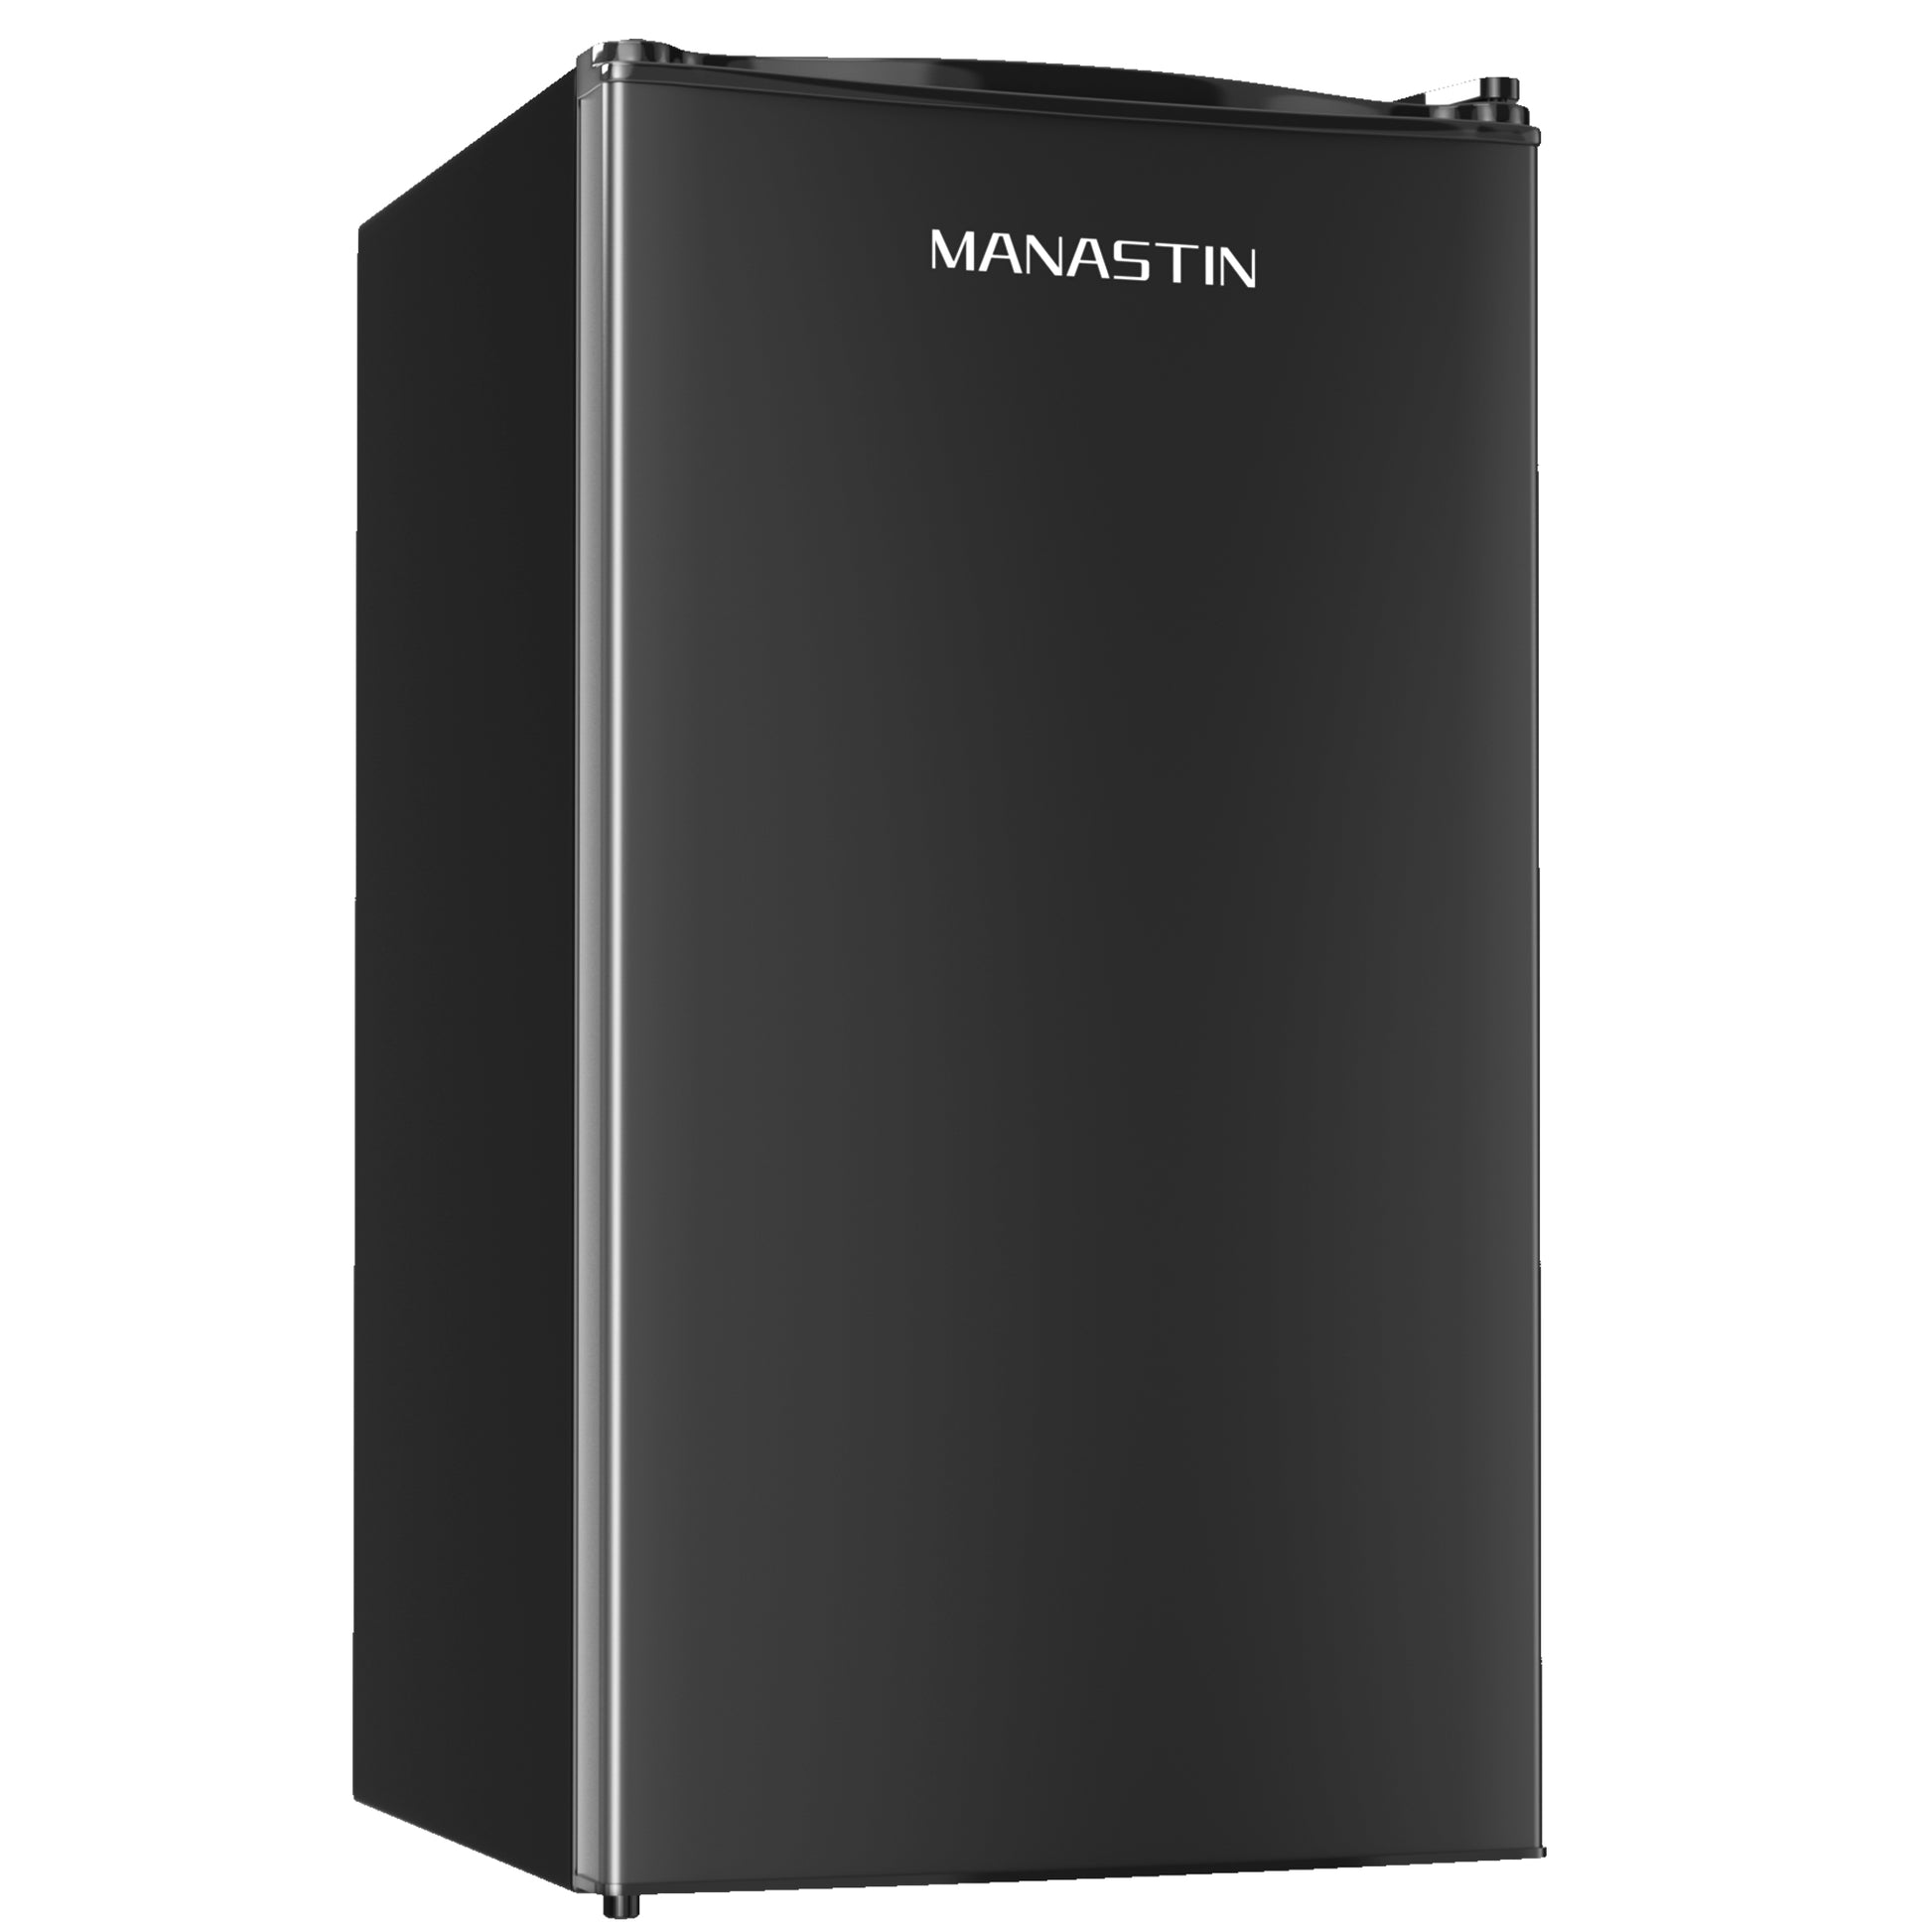 Manastin 3.2 Cu. Ft Mini Fridge with Freezer for Bedroom, Dorm, Office,  Compact Refrigerator with Adjustbale Thermostat, Removable Glass Shelves  and